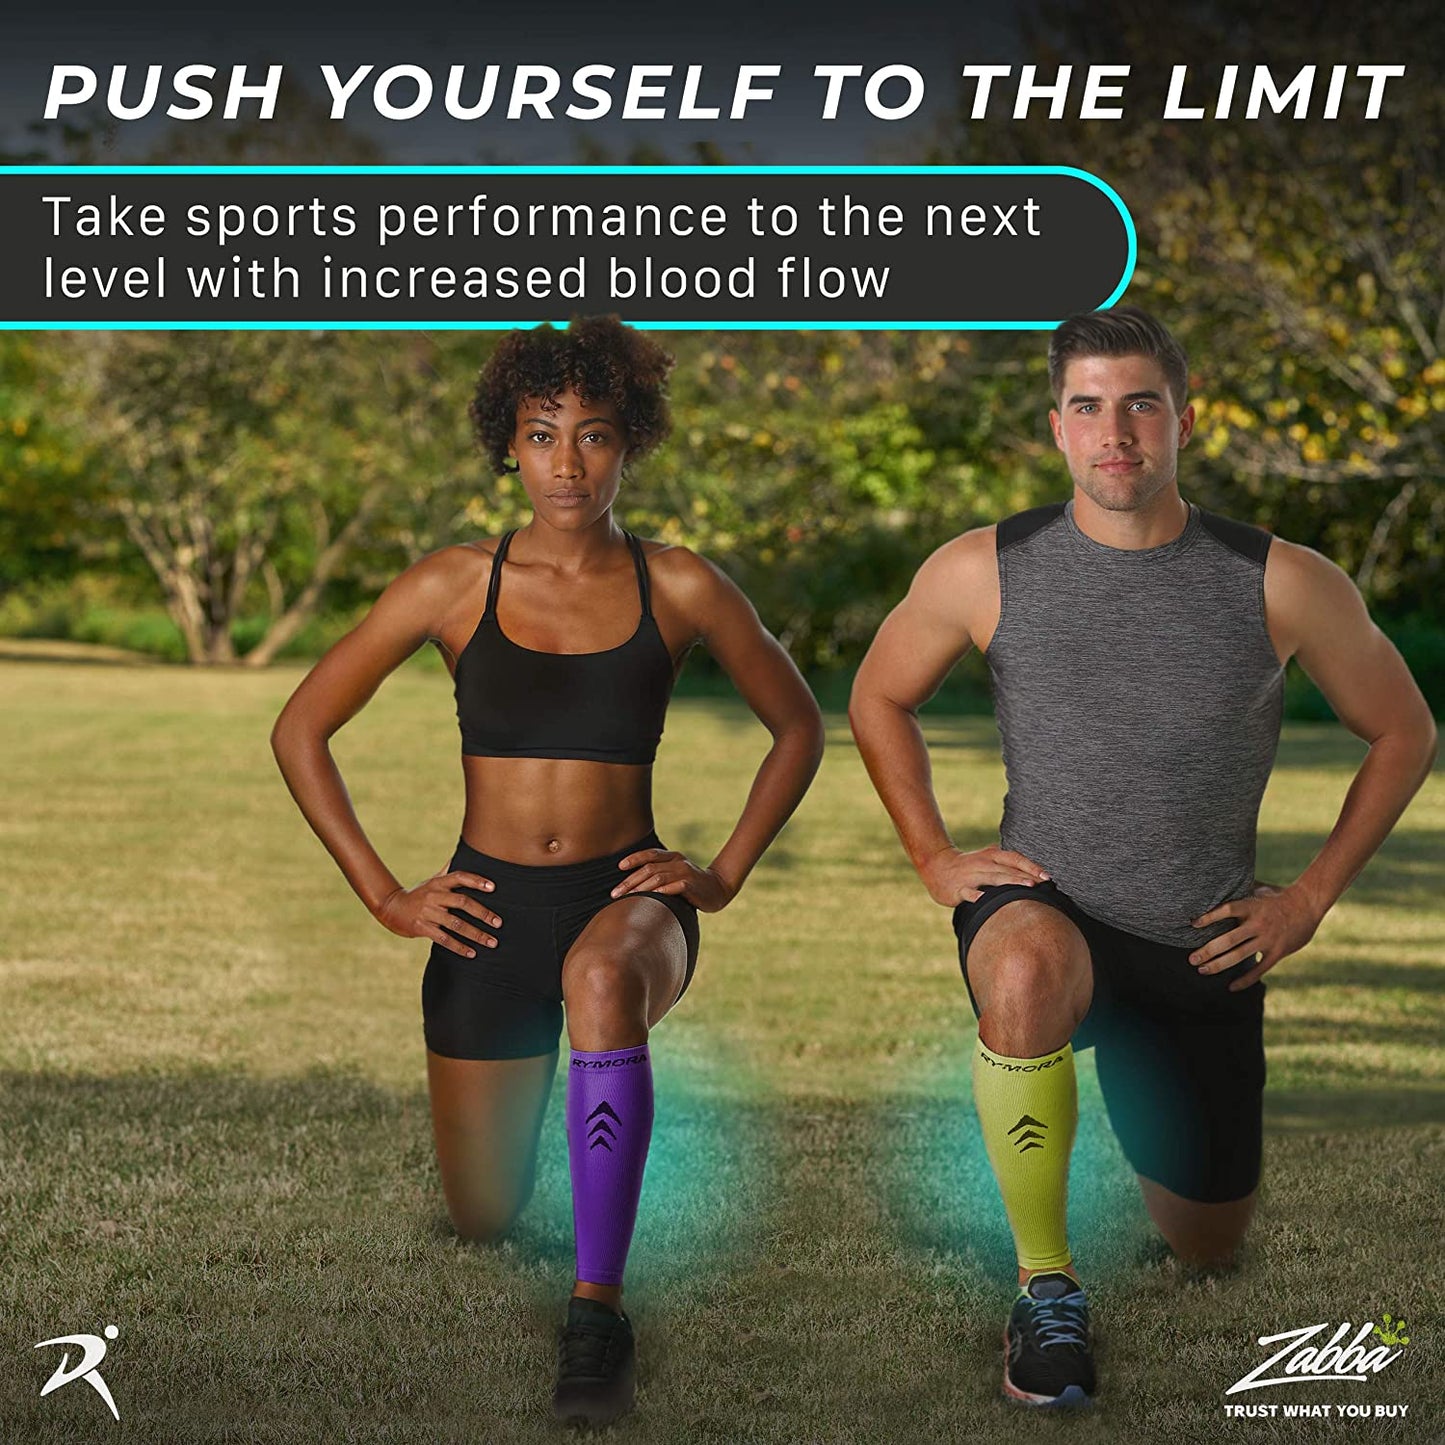 Kickin' Comfort Leg Hugs: Say Goodbye to Aching Limbs with Mr. Flex's Supportive Leg Compression Sleeves!